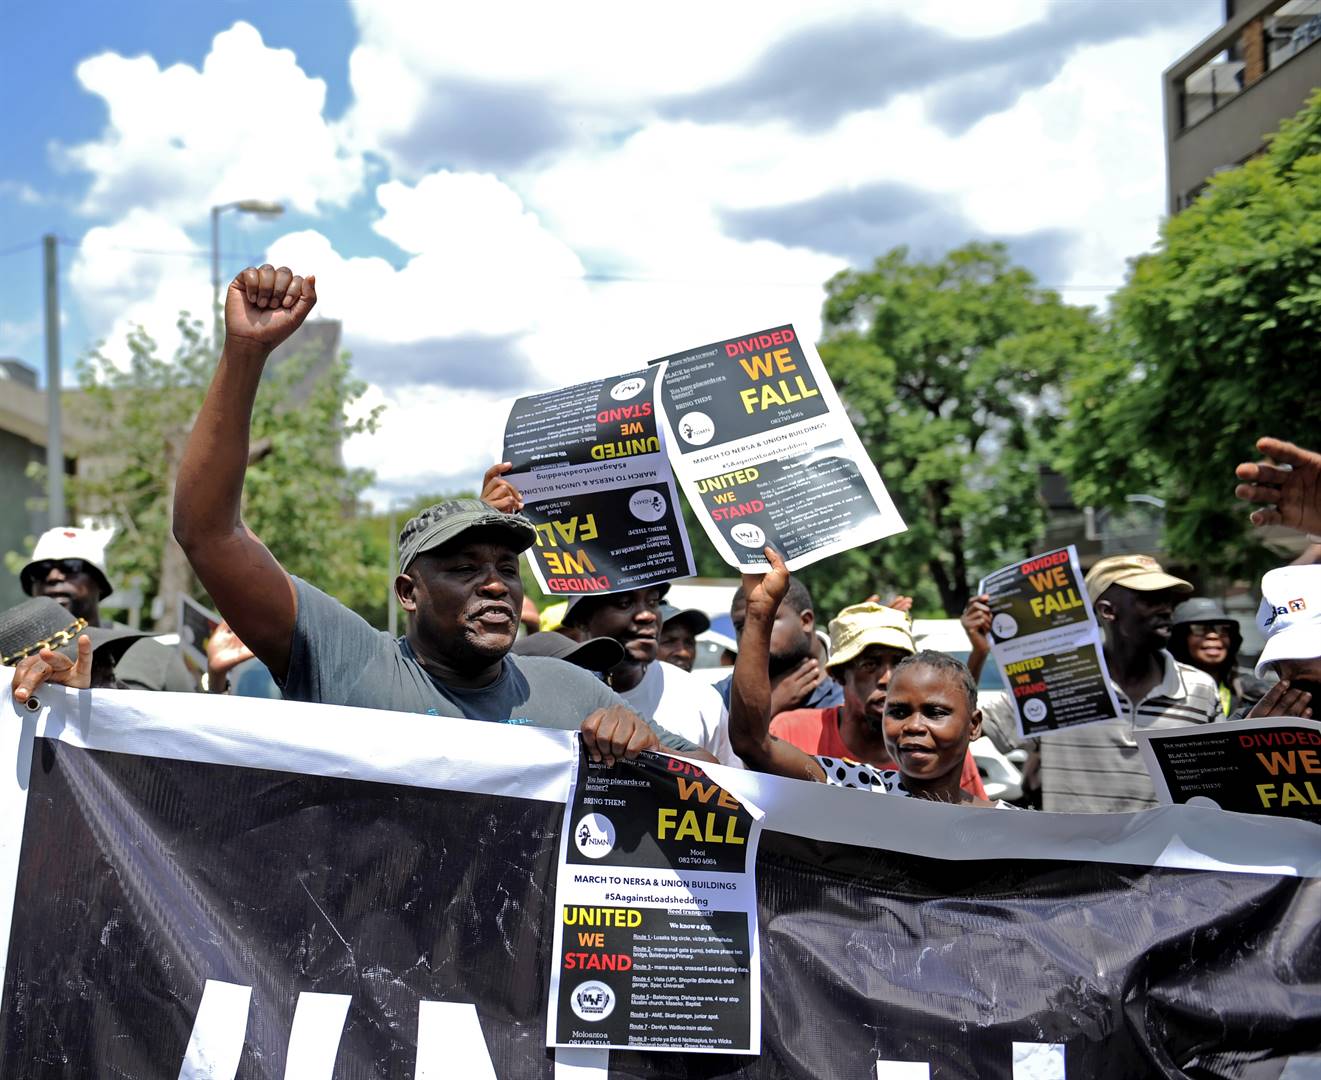  Members of a movement calling itself Not in My Name and members of the Azanian People’s Organisation marched to the National Energy Regulator of SA’s offices in Pretoria to protest against the recently approved 18% electricity tariff increase Photo: tebogo letsie